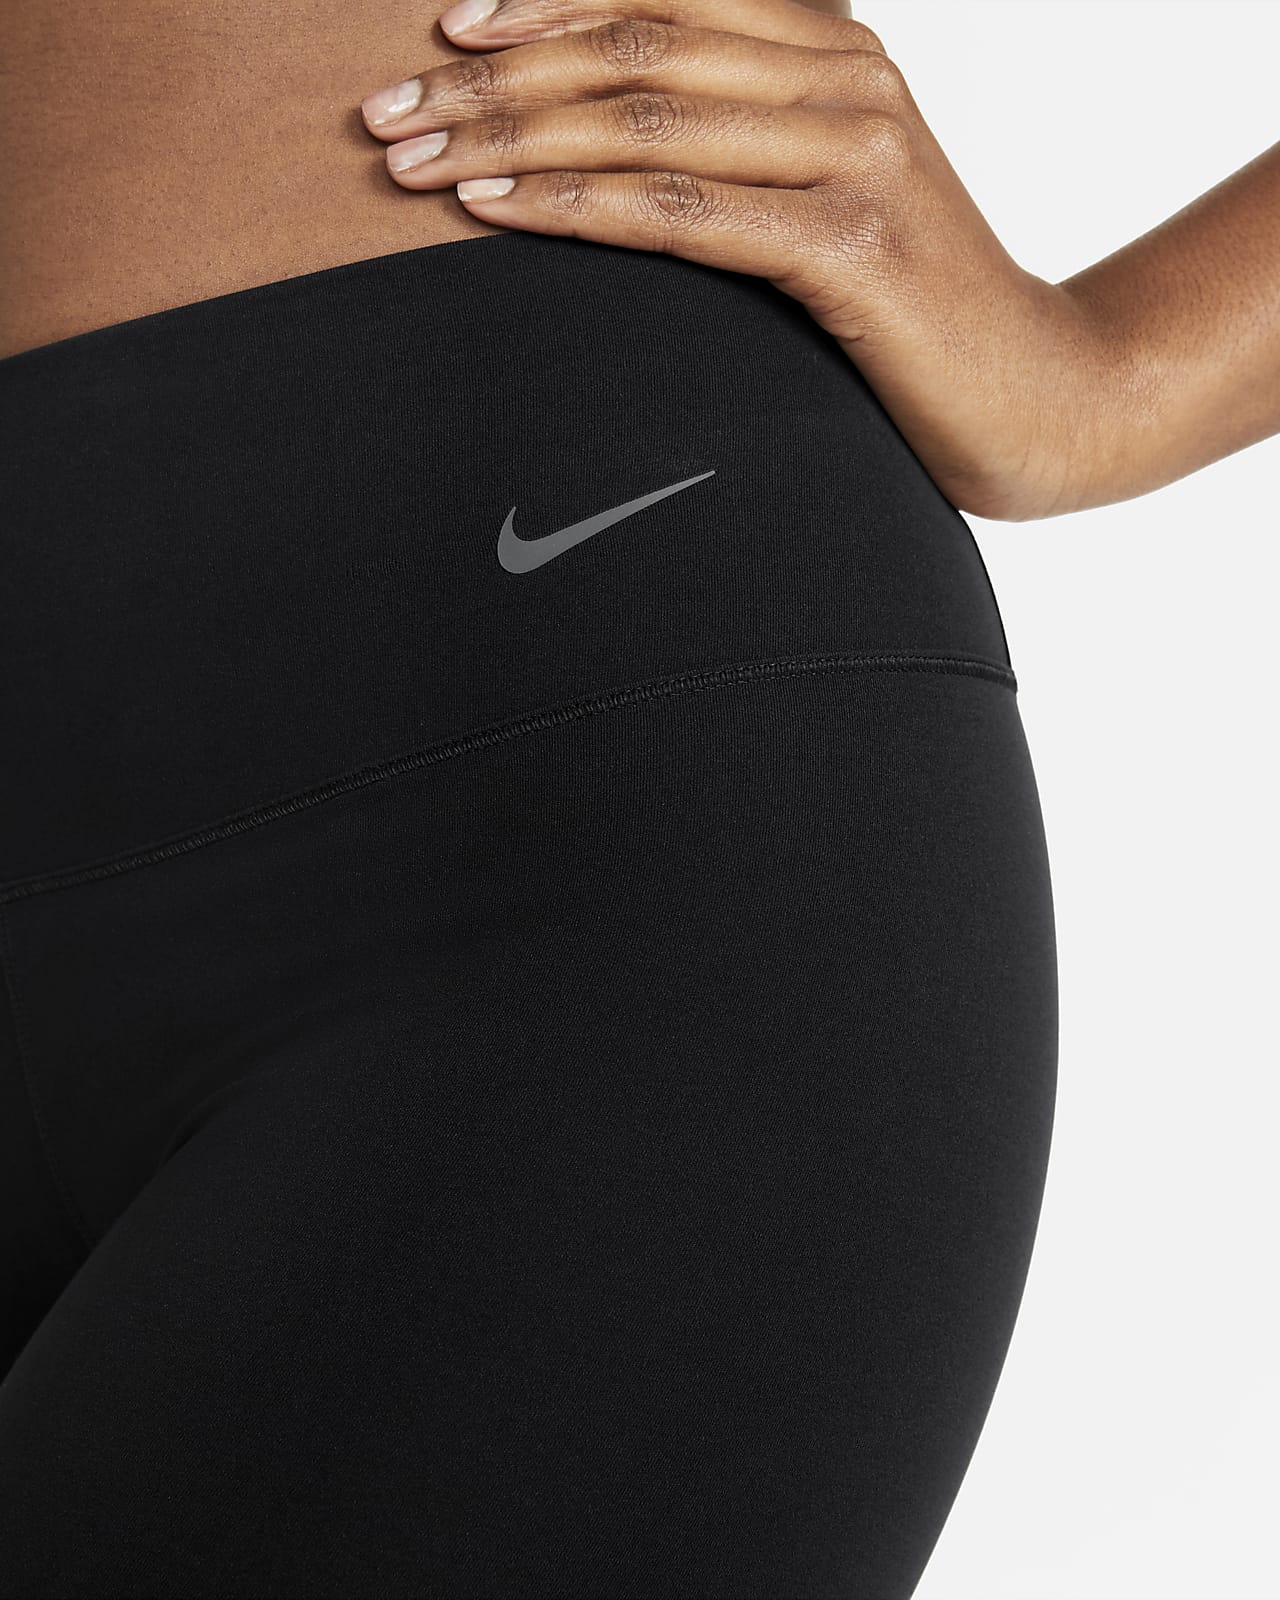 Nike Kids Graphic Leggings - Soft and Lightweight